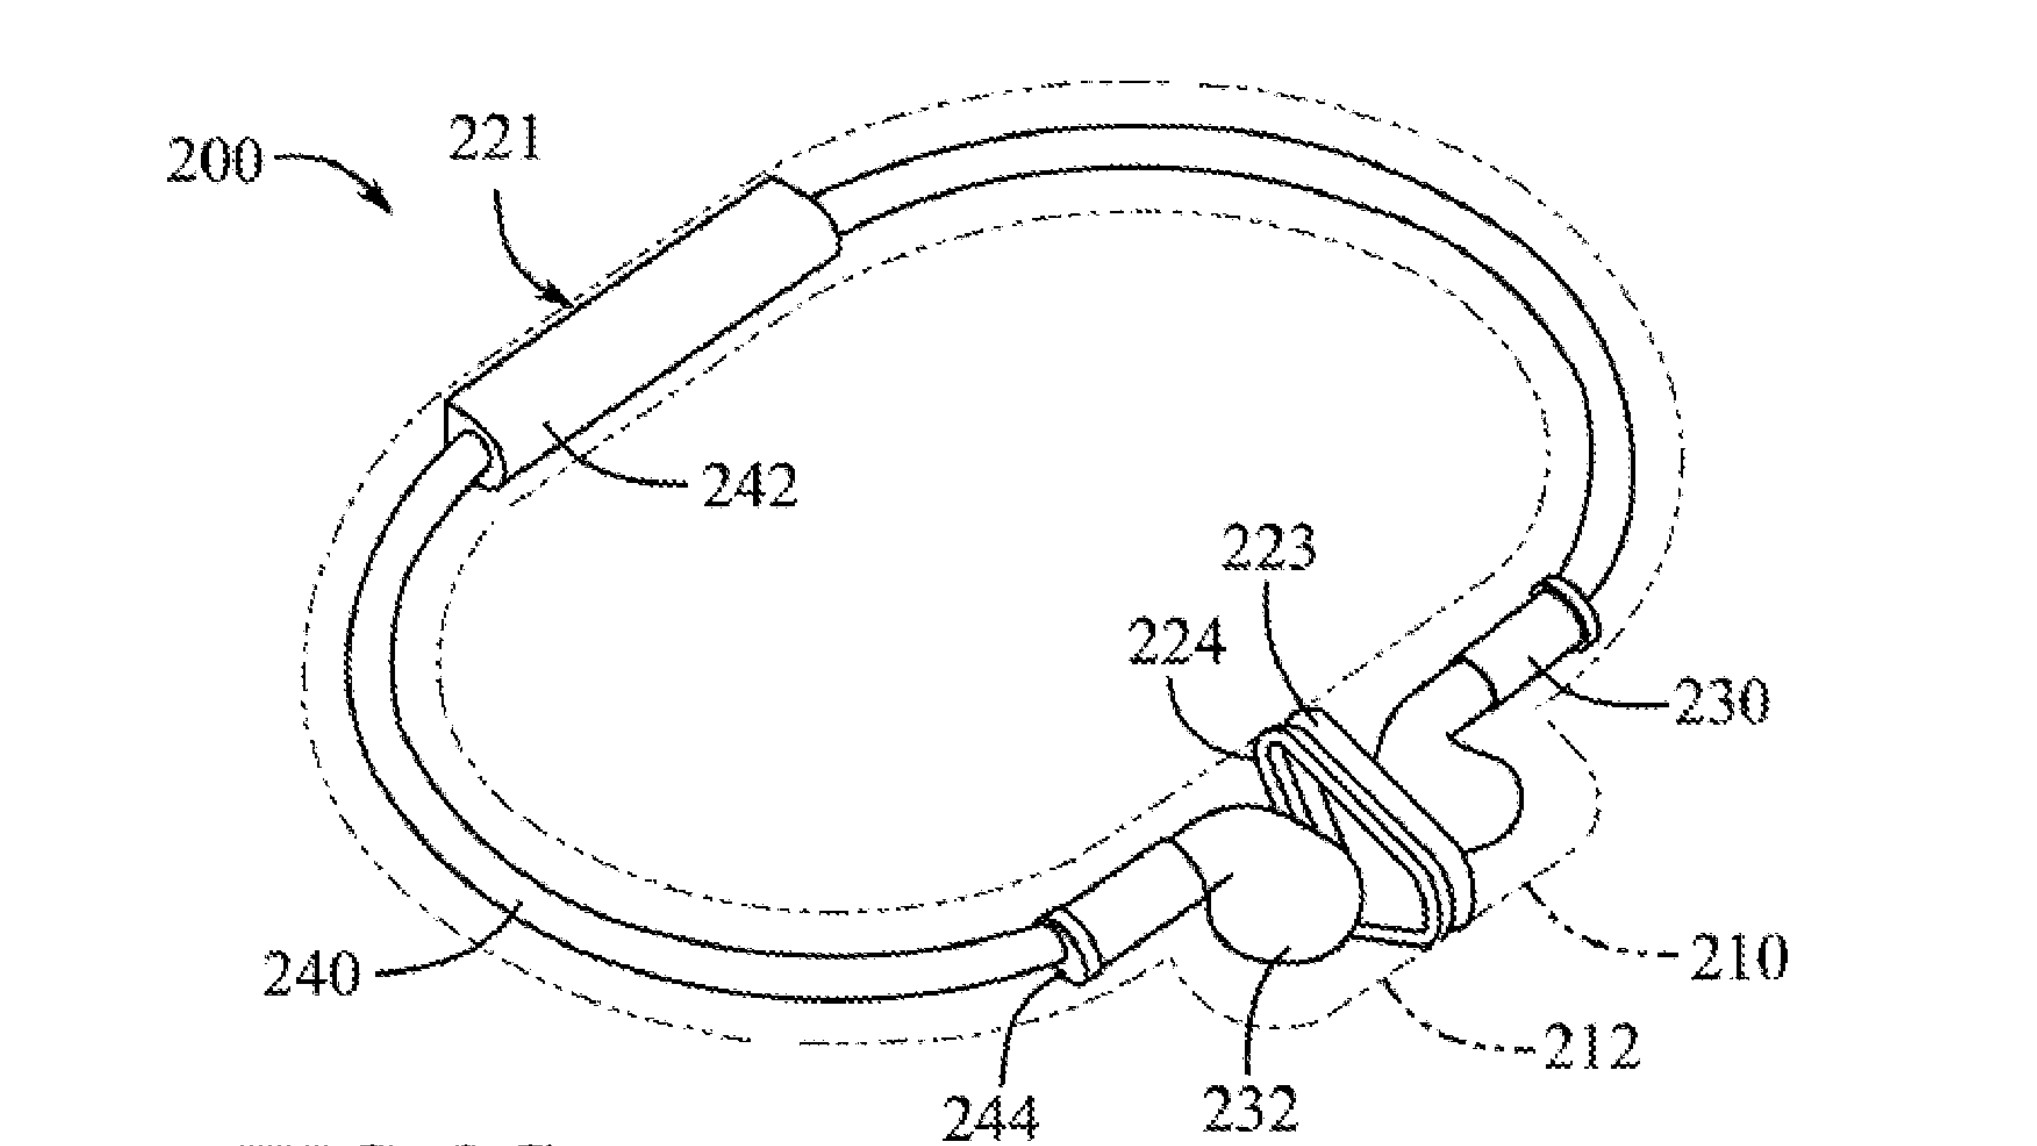 An image within a granted Apple USPTO patent, showing AirPods within a necklace-style charging accessory